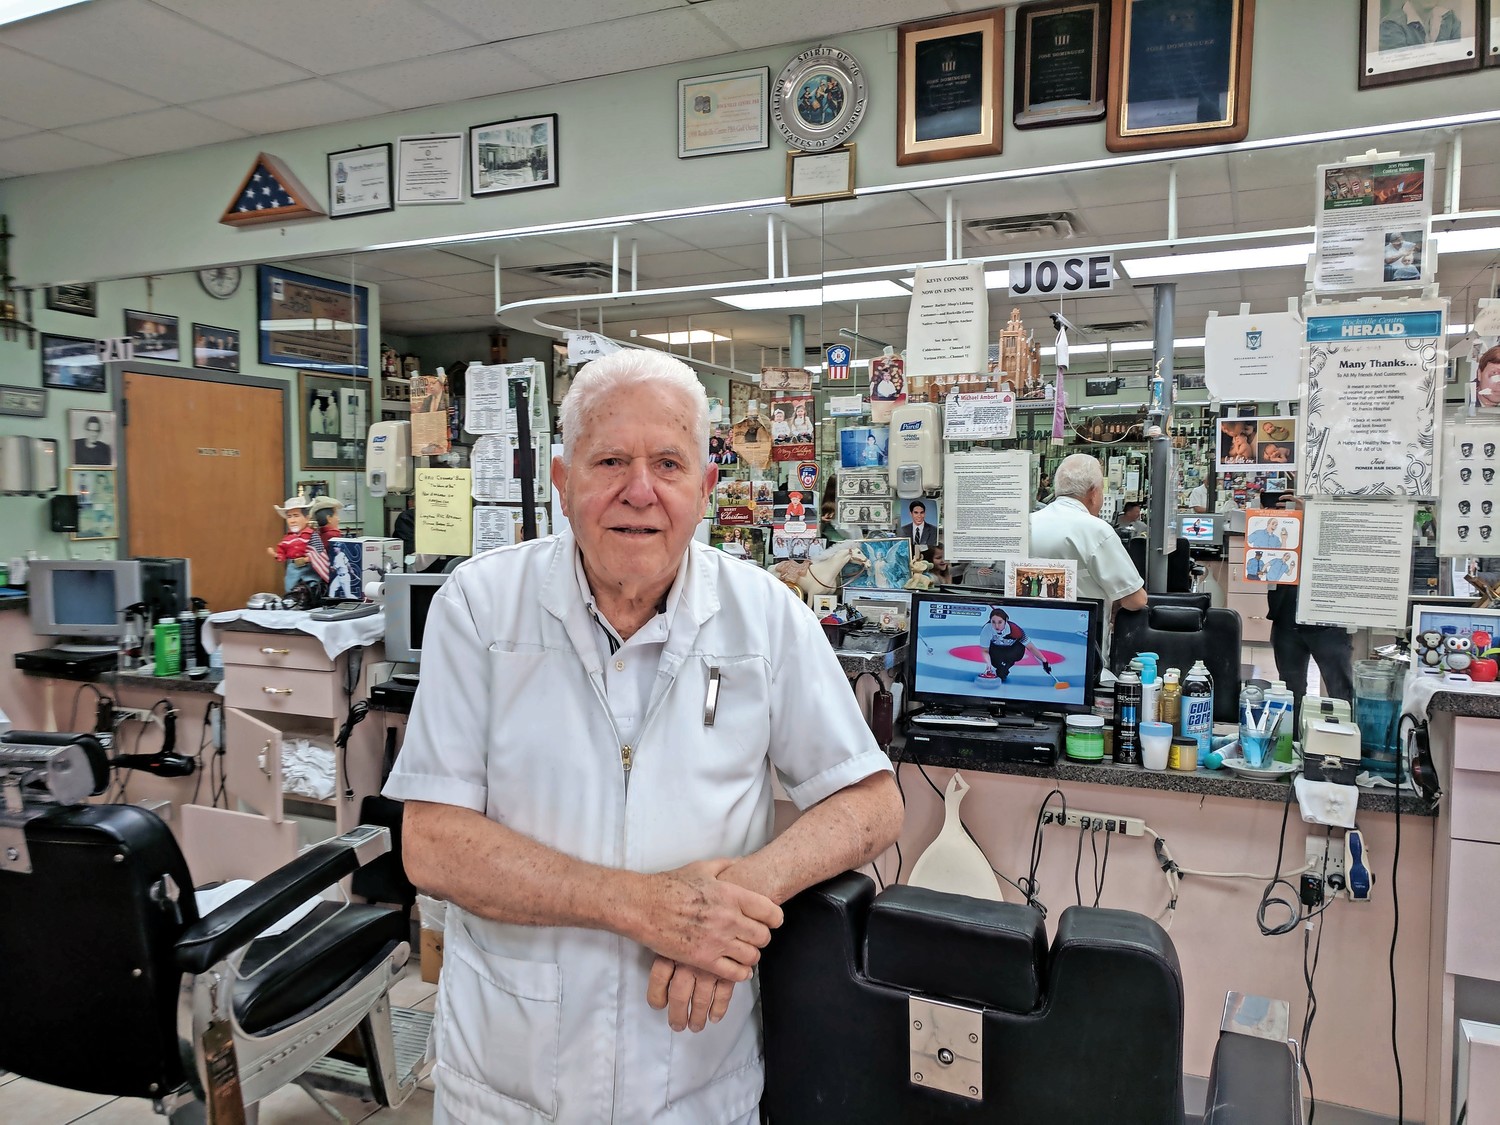 Jose Dominguez came to Rockville Centre from Cuba 50 years ago, and has spent those decades cutting hair for customers.